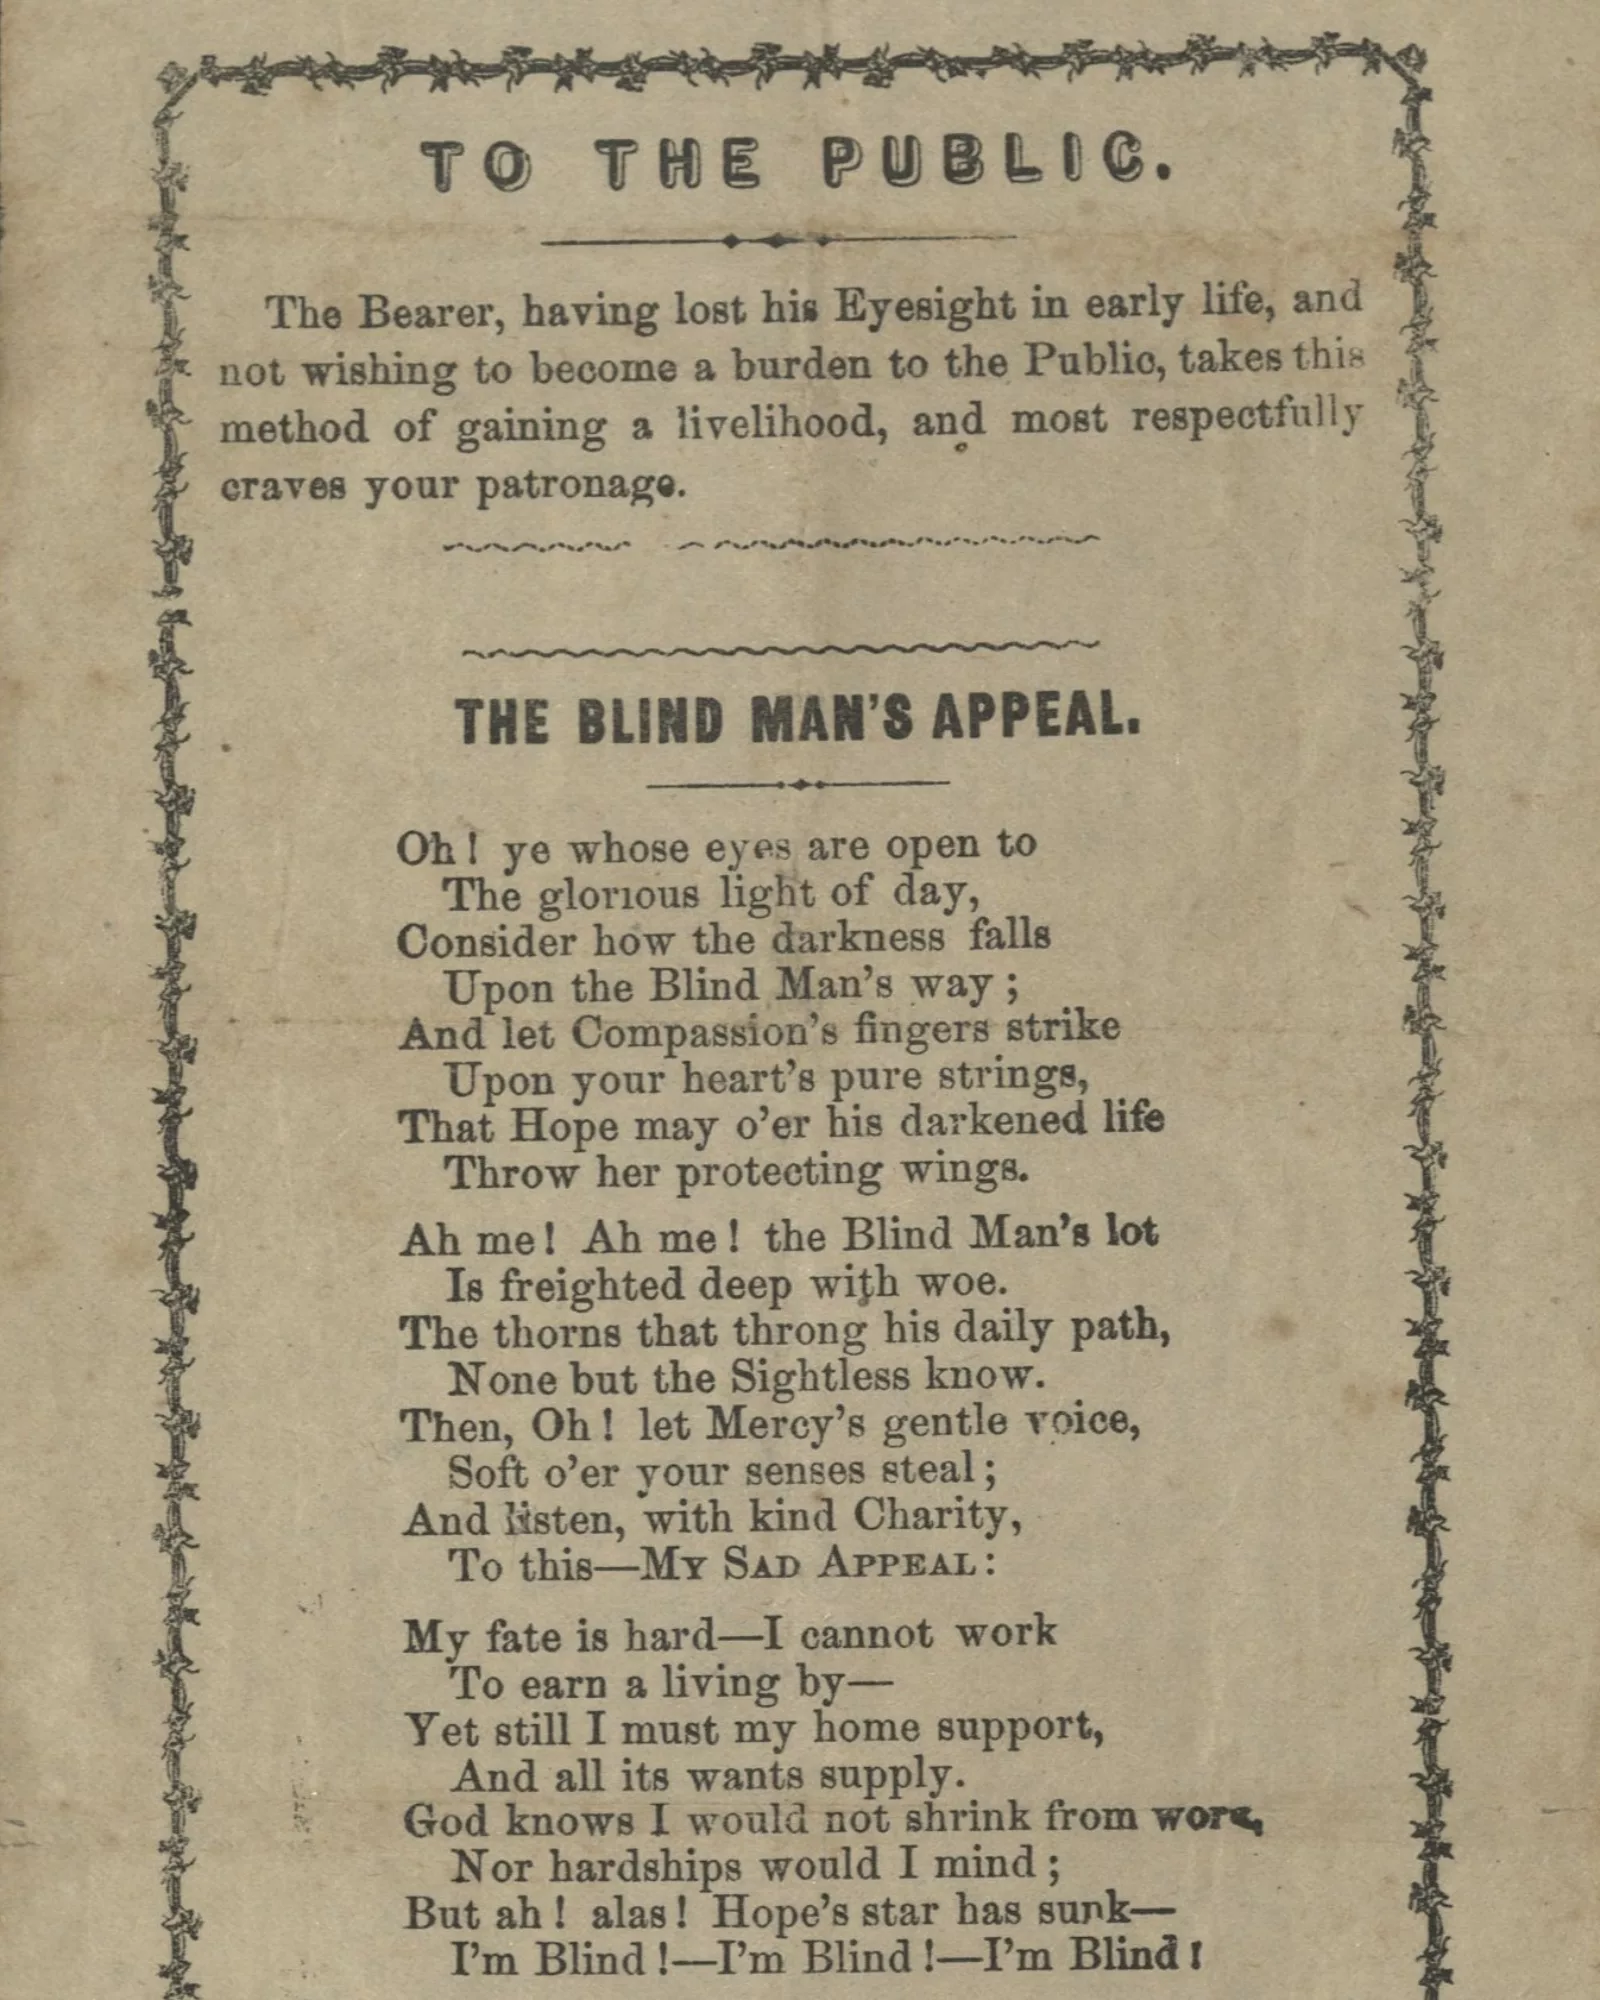 The top half of "The Blind Man's Appeal" poem. The introductory paragraph reads, "The Bearer, having lost his Eyesight in early life, and not wishing to become a burden to the Public, takes this method of gaining a livelihood, and most respectfully craves your patronage."